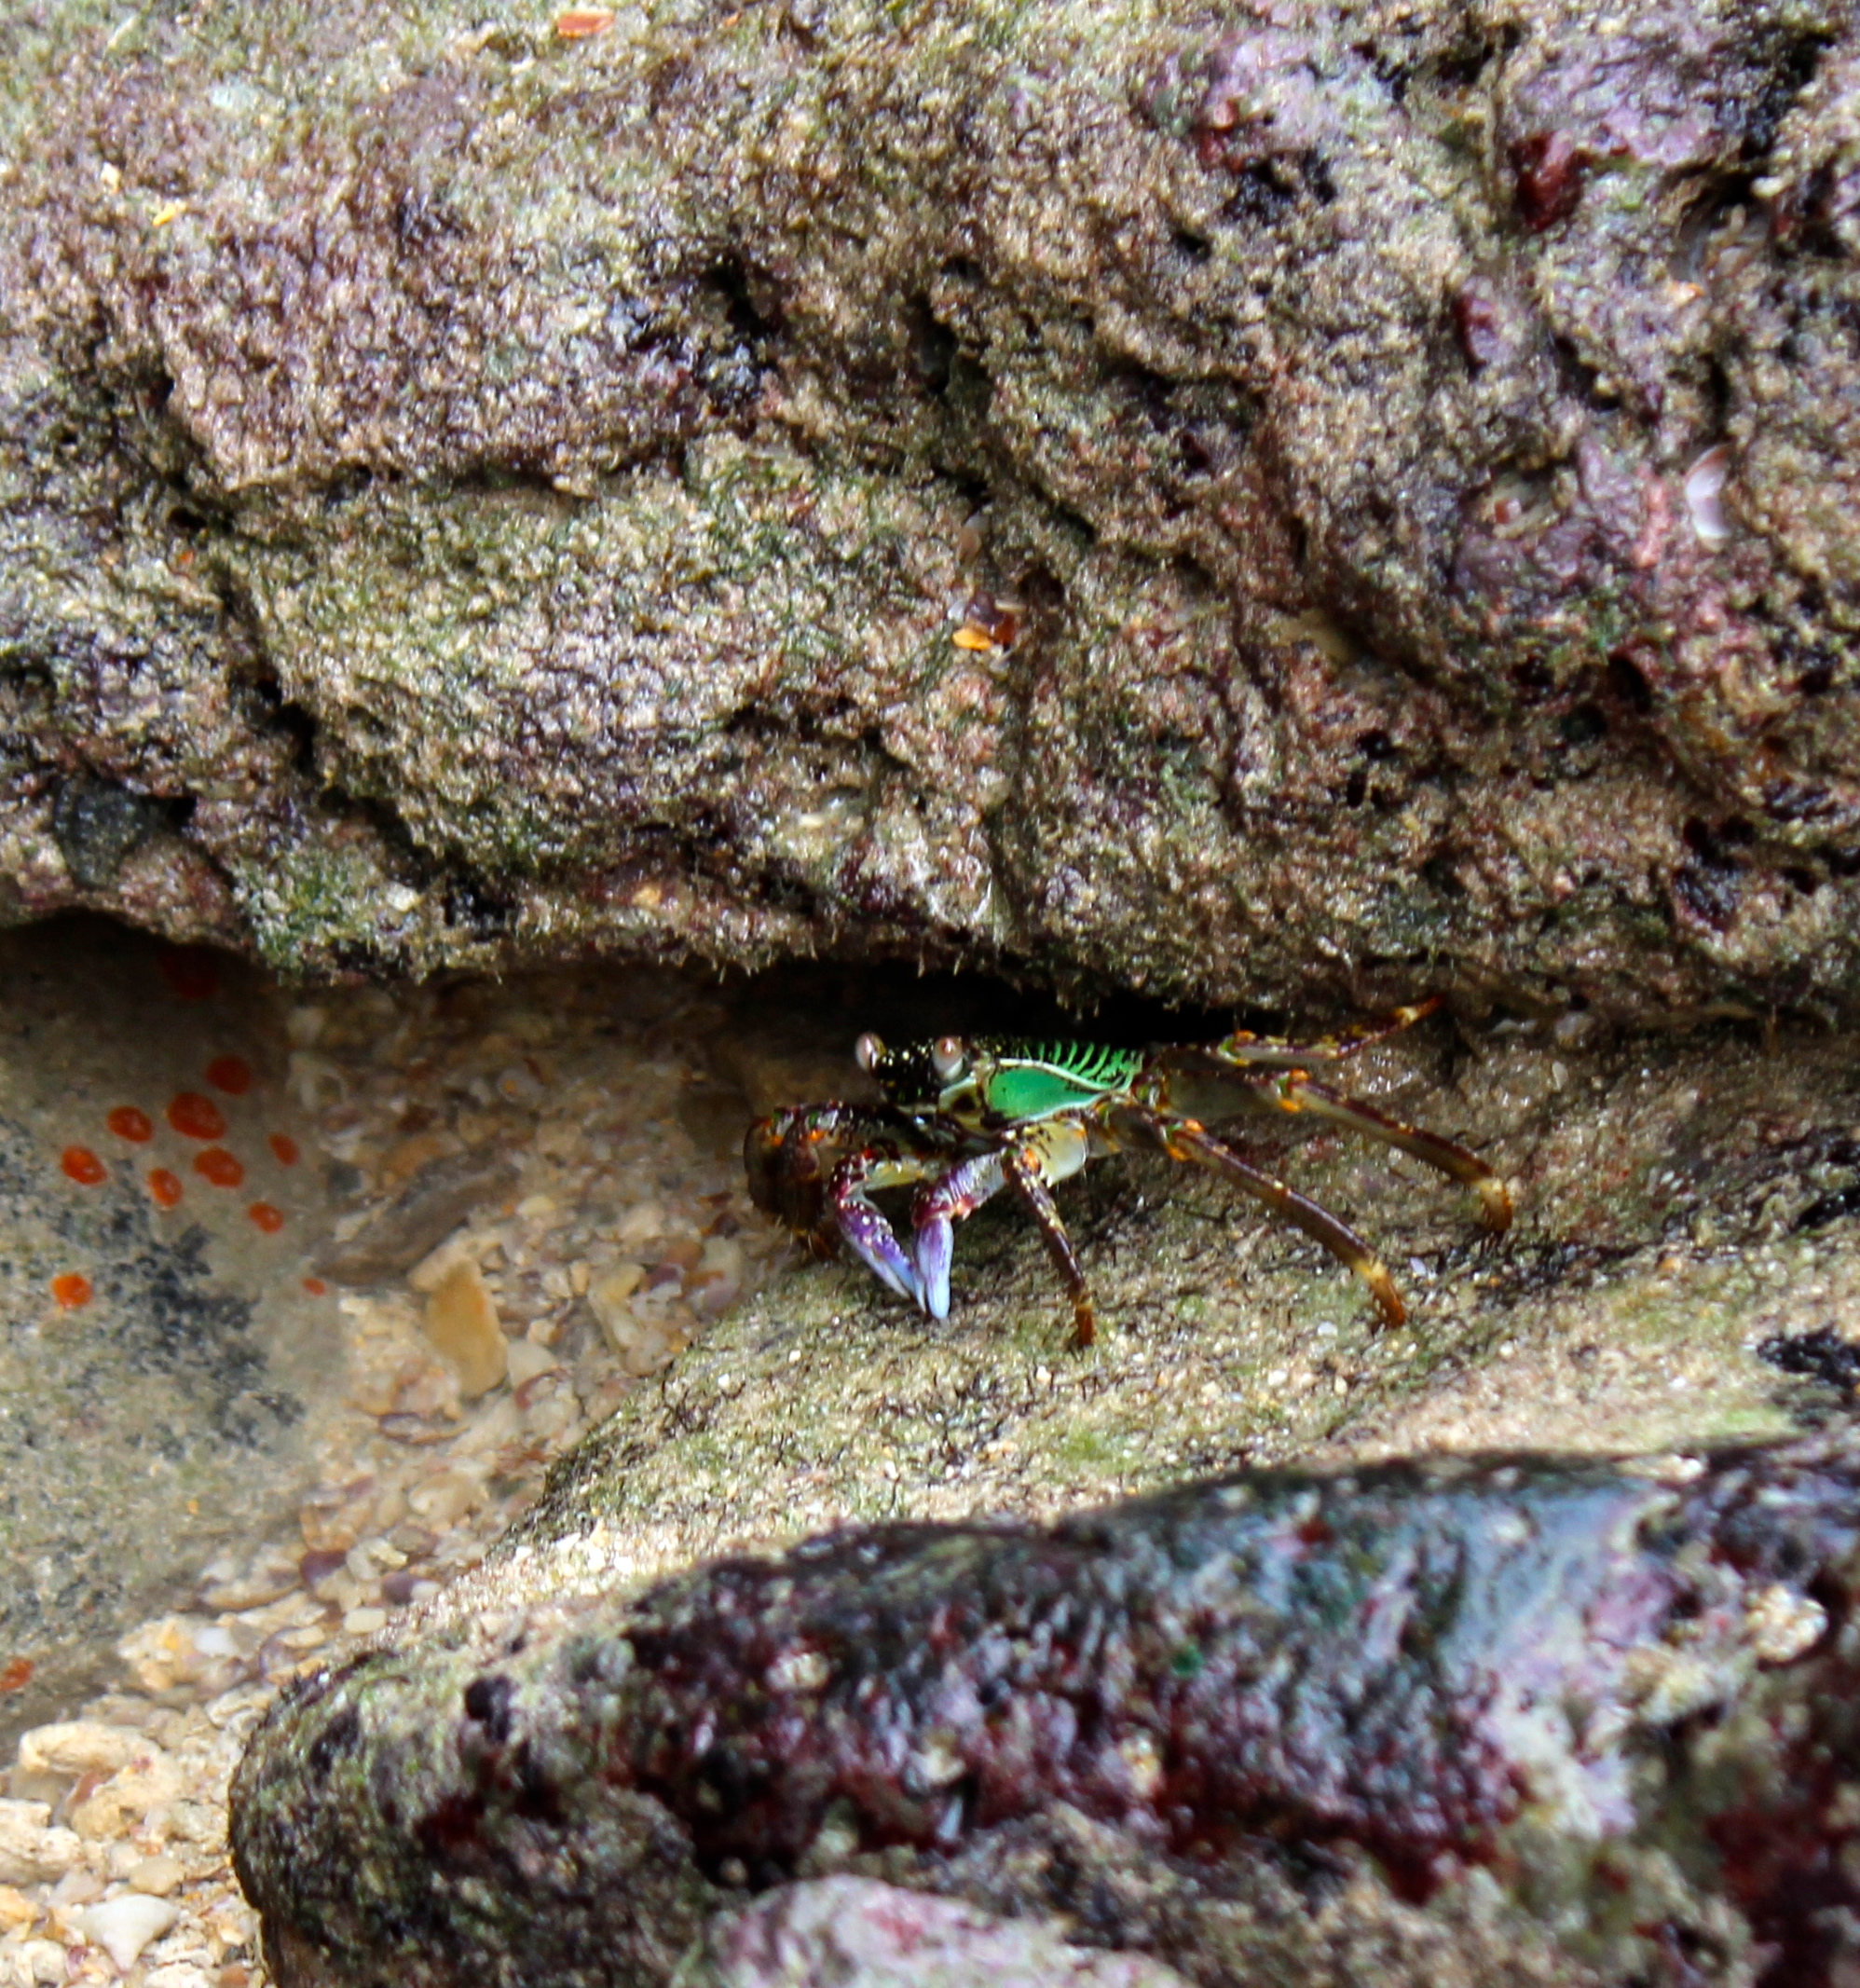 Saw the most beautiful crab during low tide in Tonsai Bay.